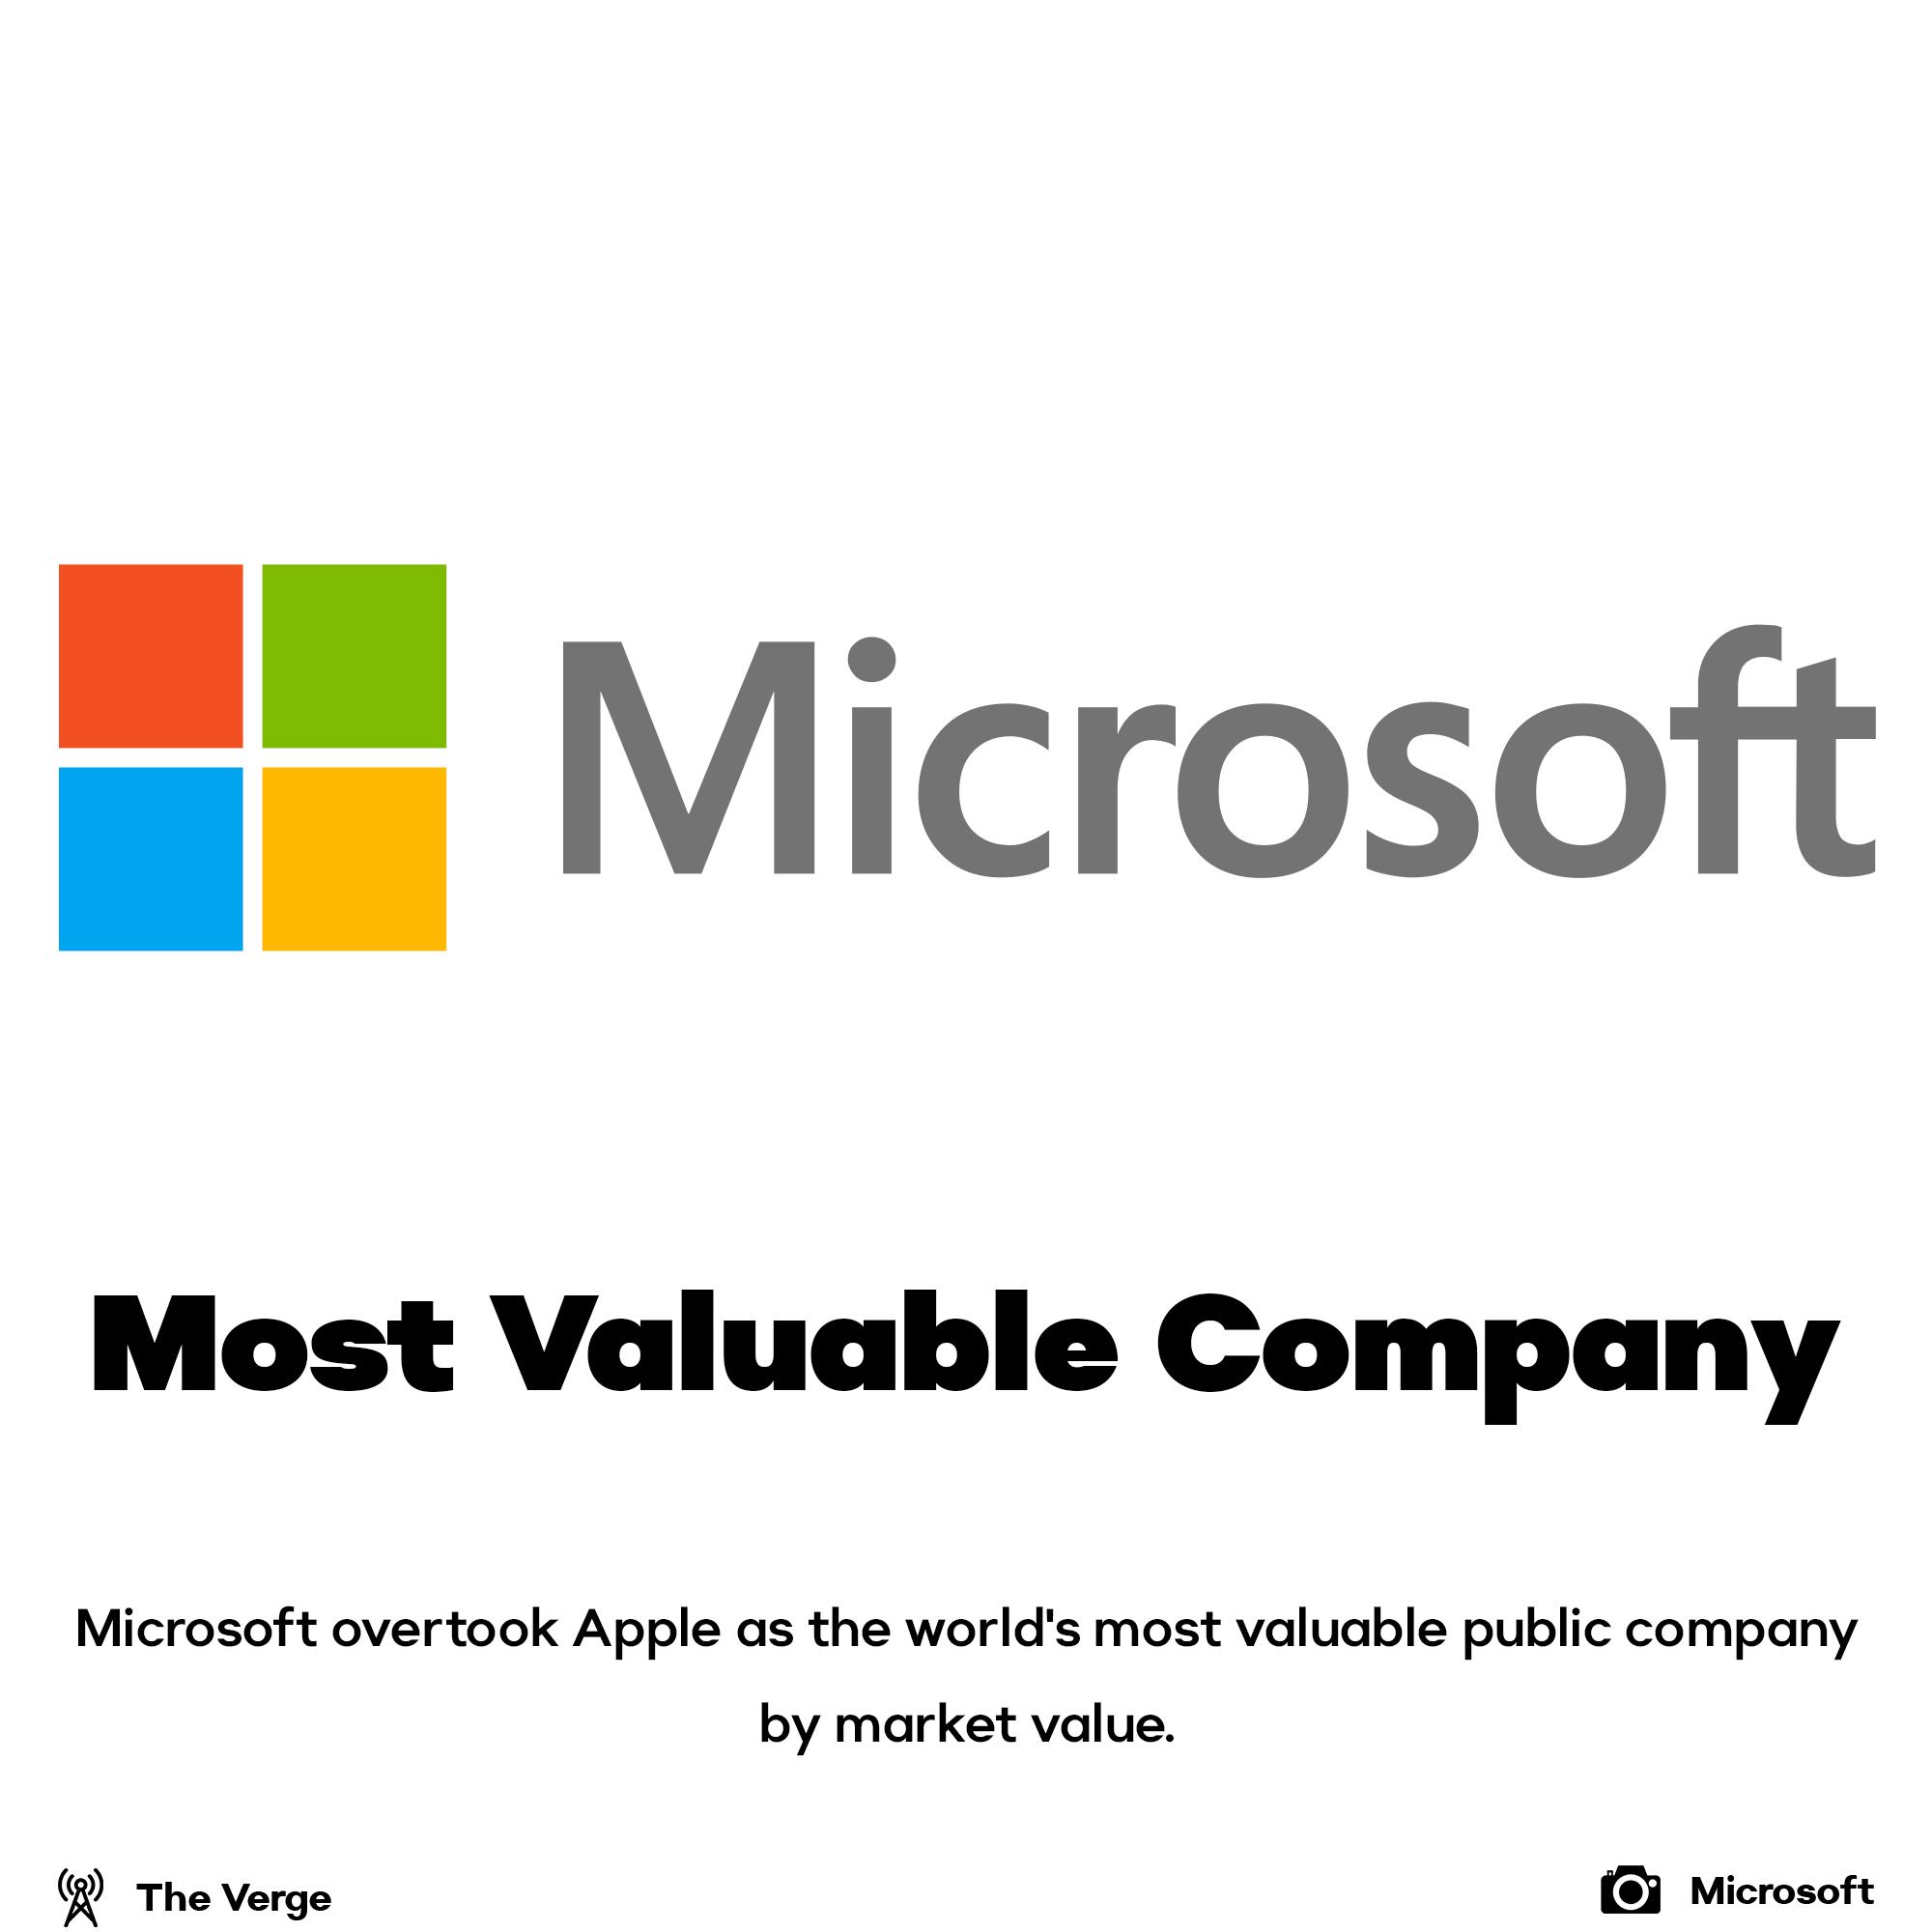 Microsoft is the Most Valuable Company